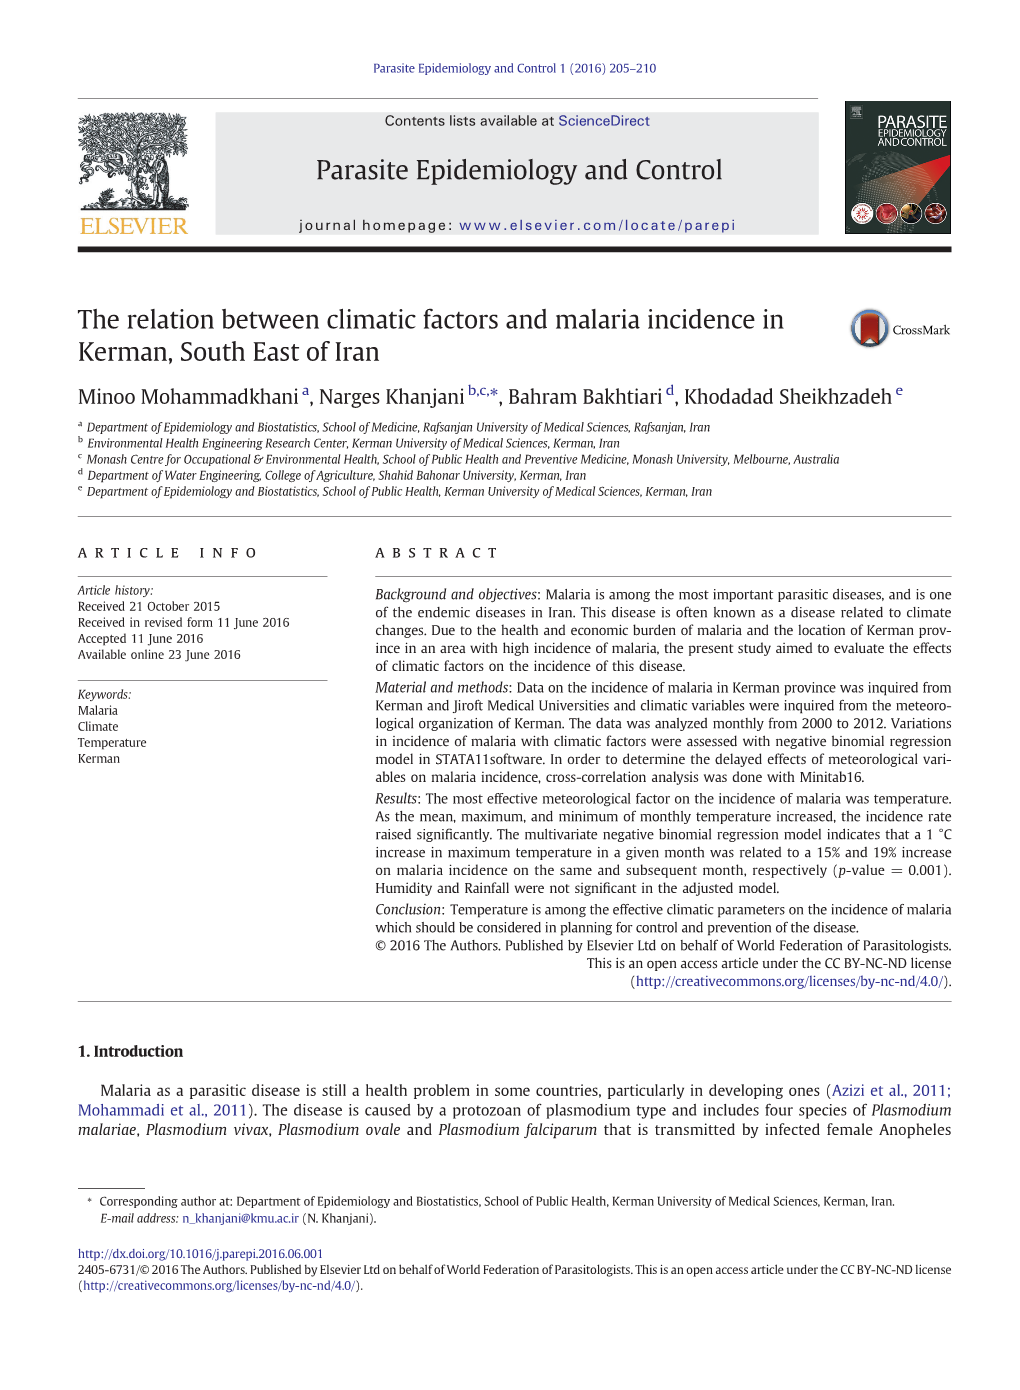 The Relation Between Climatic Factors and Malaria Incidence in Kerman, South East of Iran